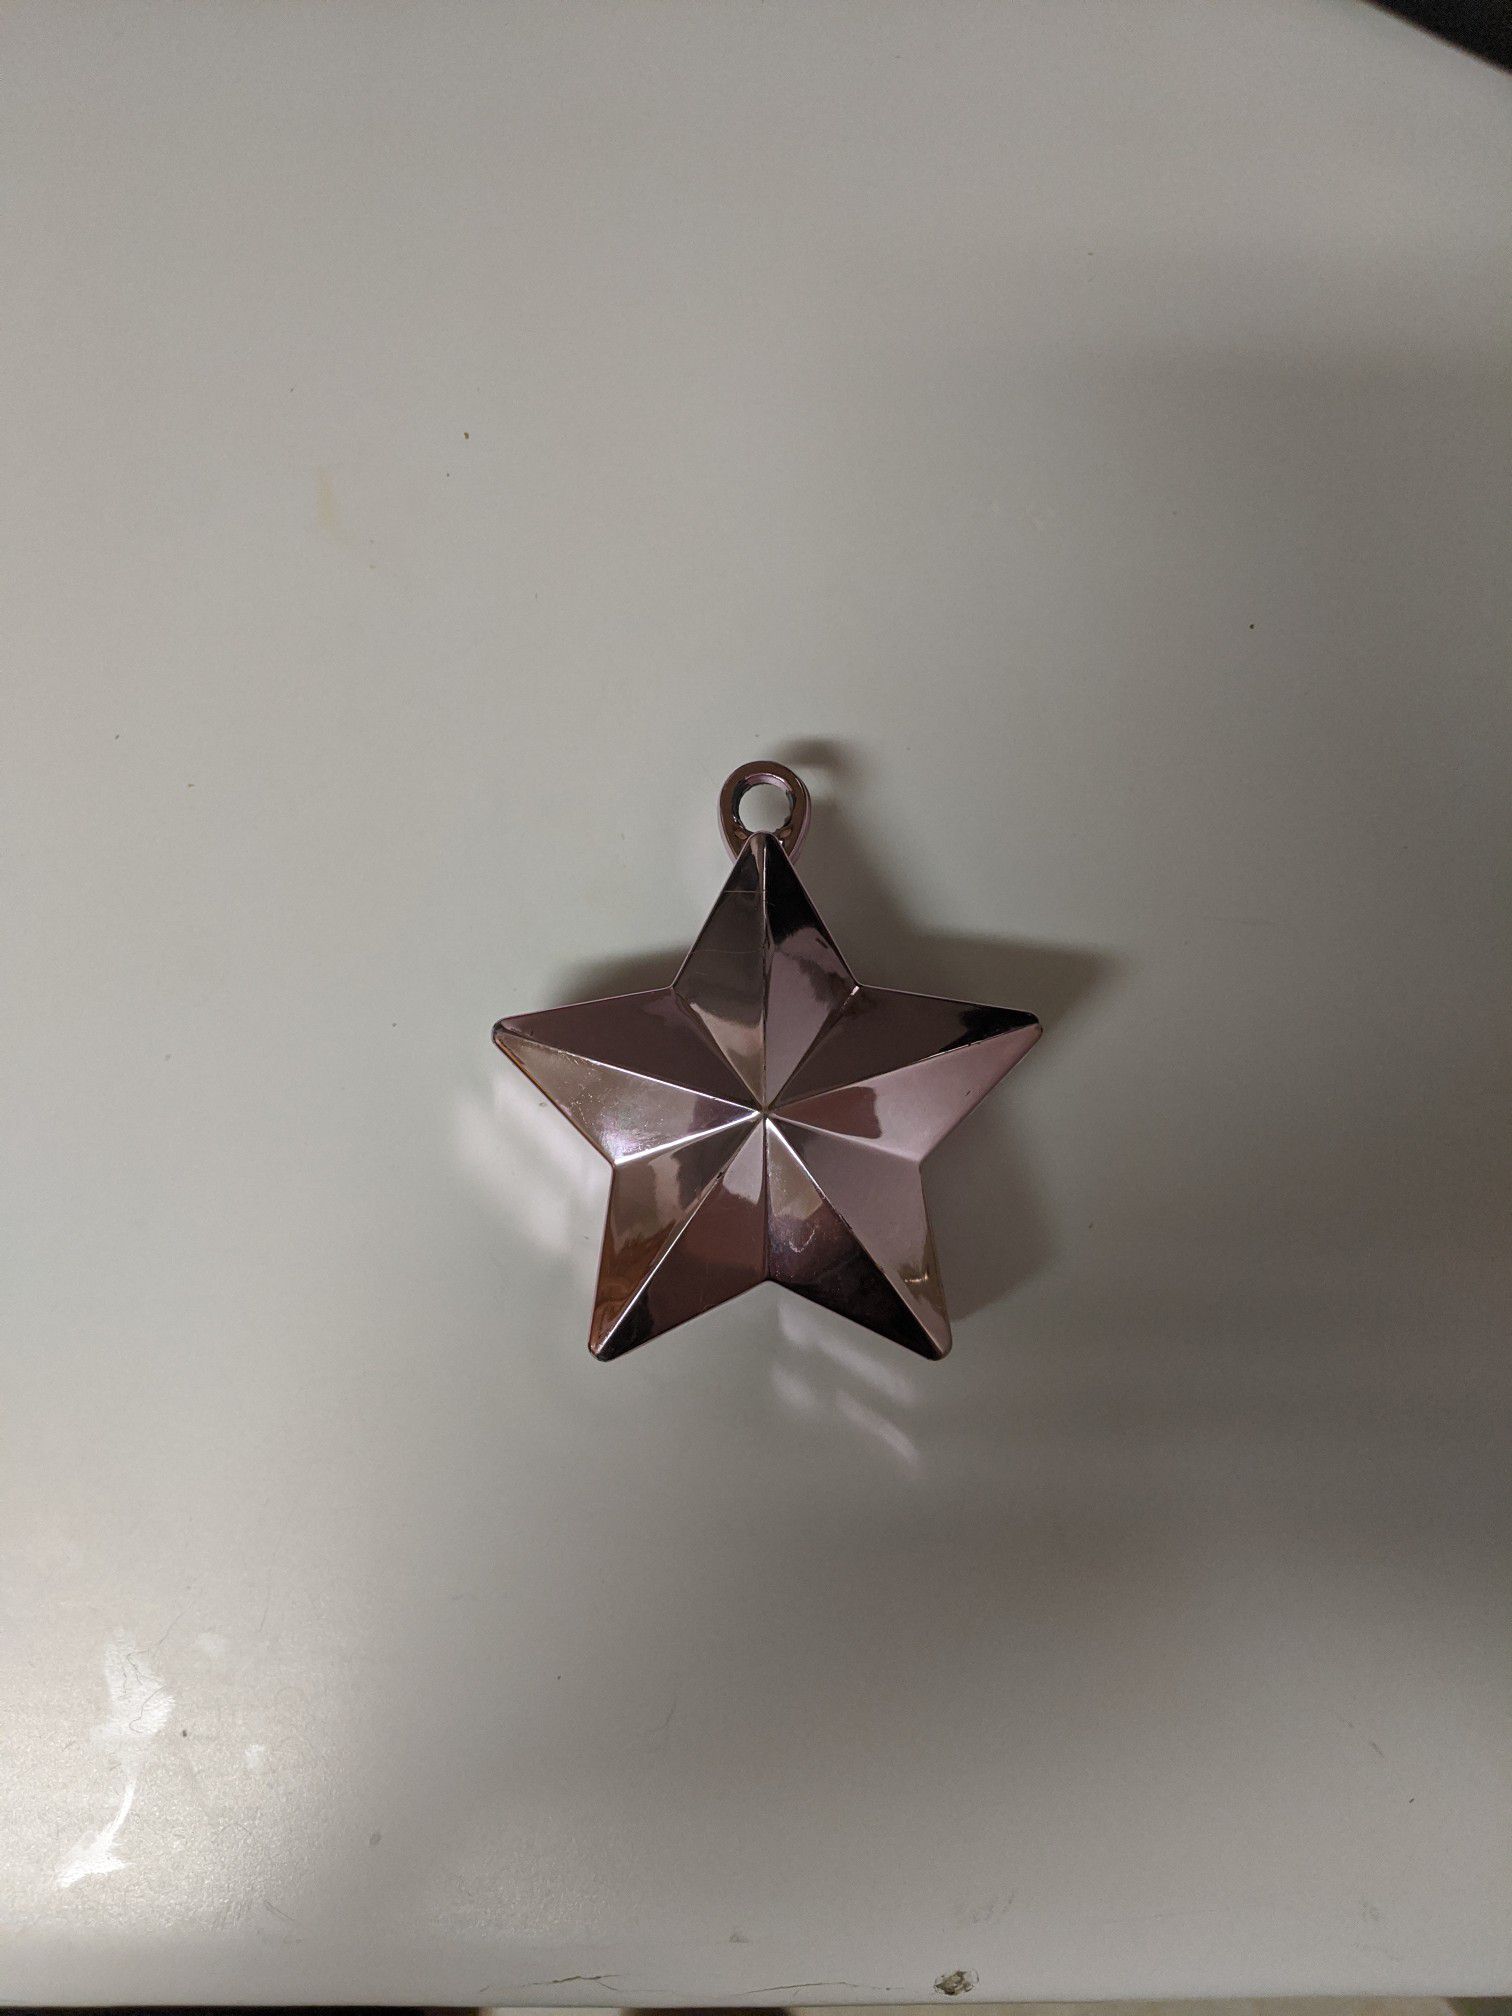 Star decoration / paper weight